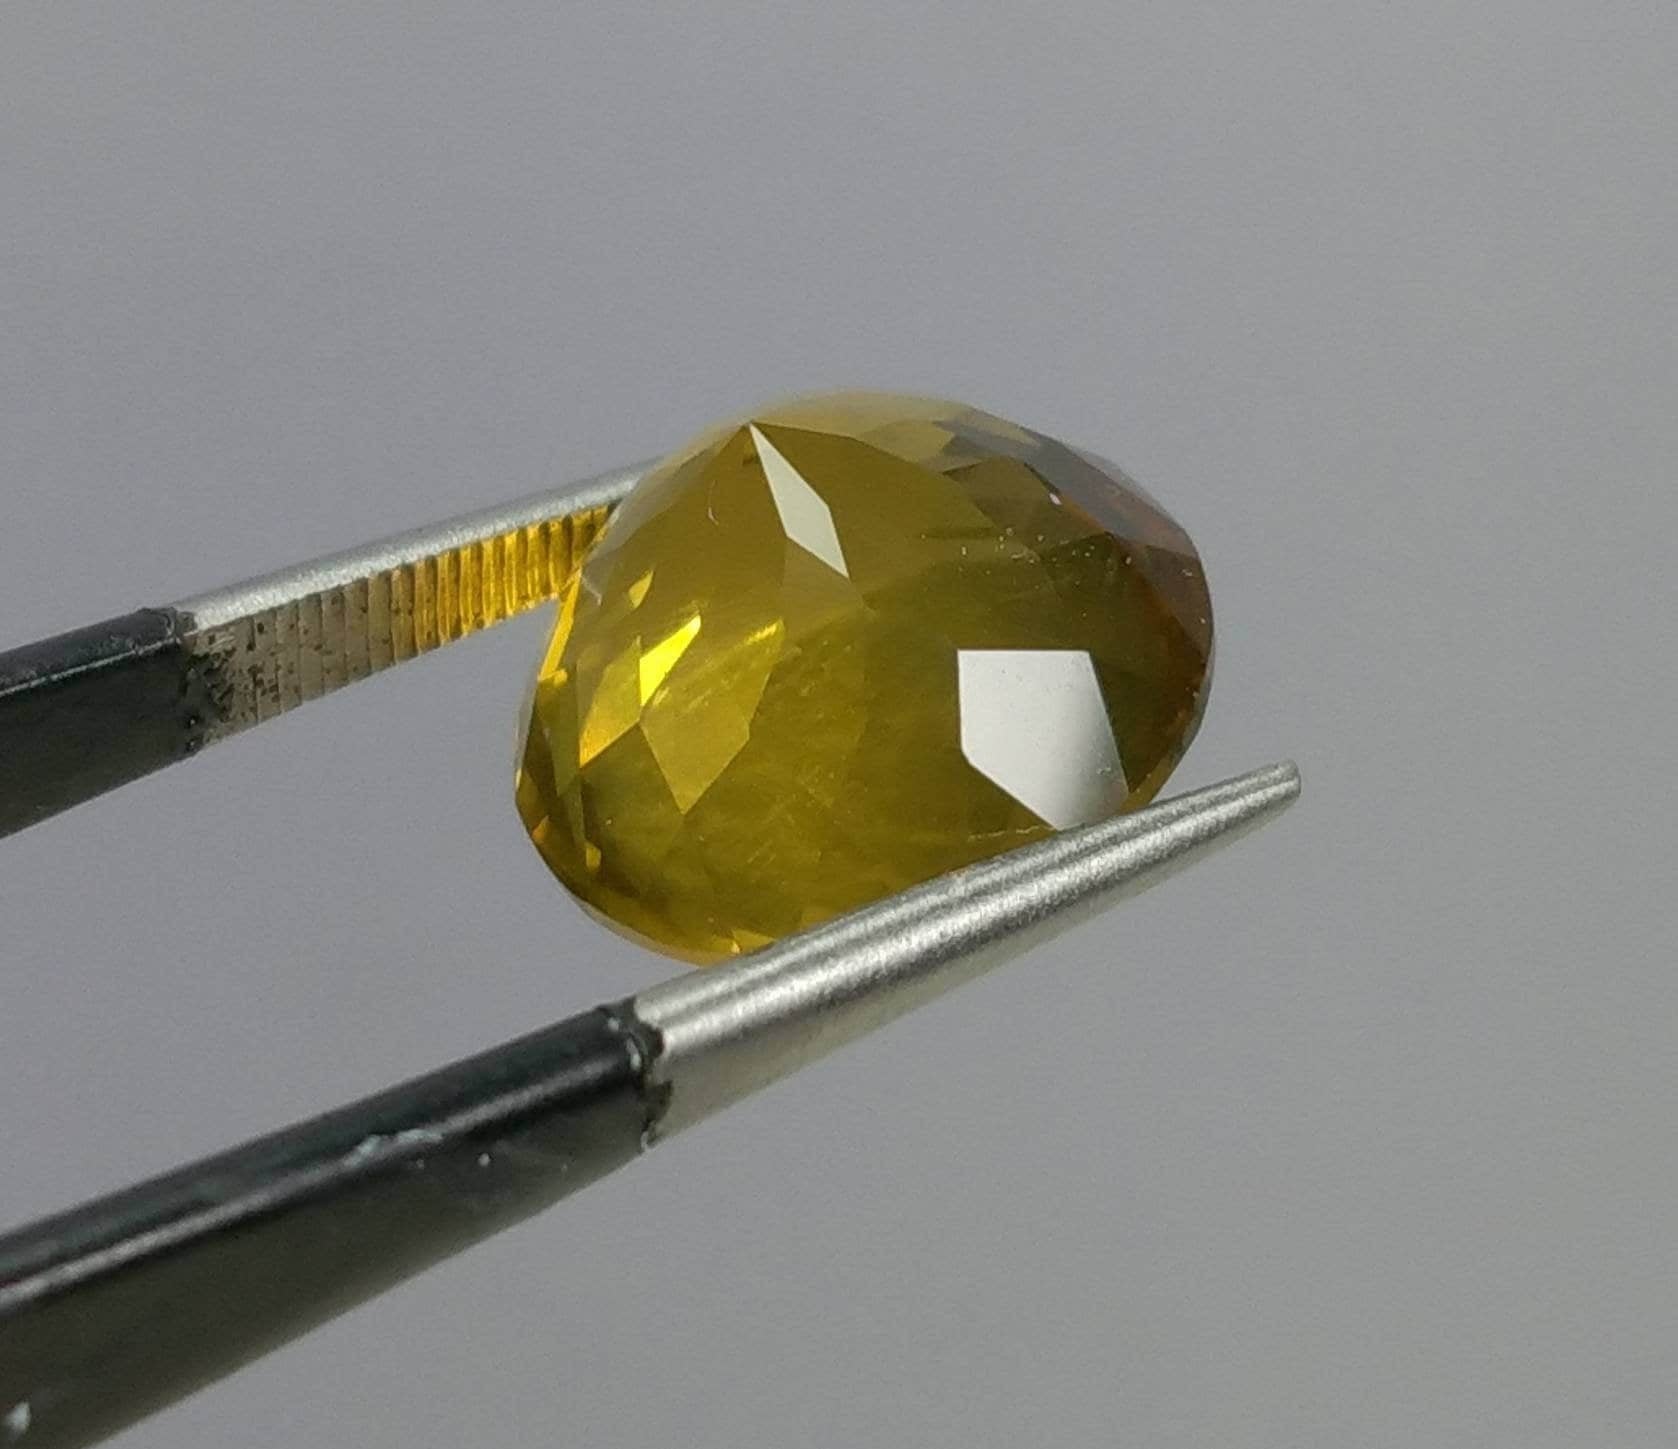 ARSAA GEMS AND MINERALSTop Quality beautiful natural 8.5 carats VV clarity round shape citrine faceted gem - Premium  from ARSAA GEMS AND MINERALS - Just $27.00! Shop now at ARSAA GEMS AND MINERALS